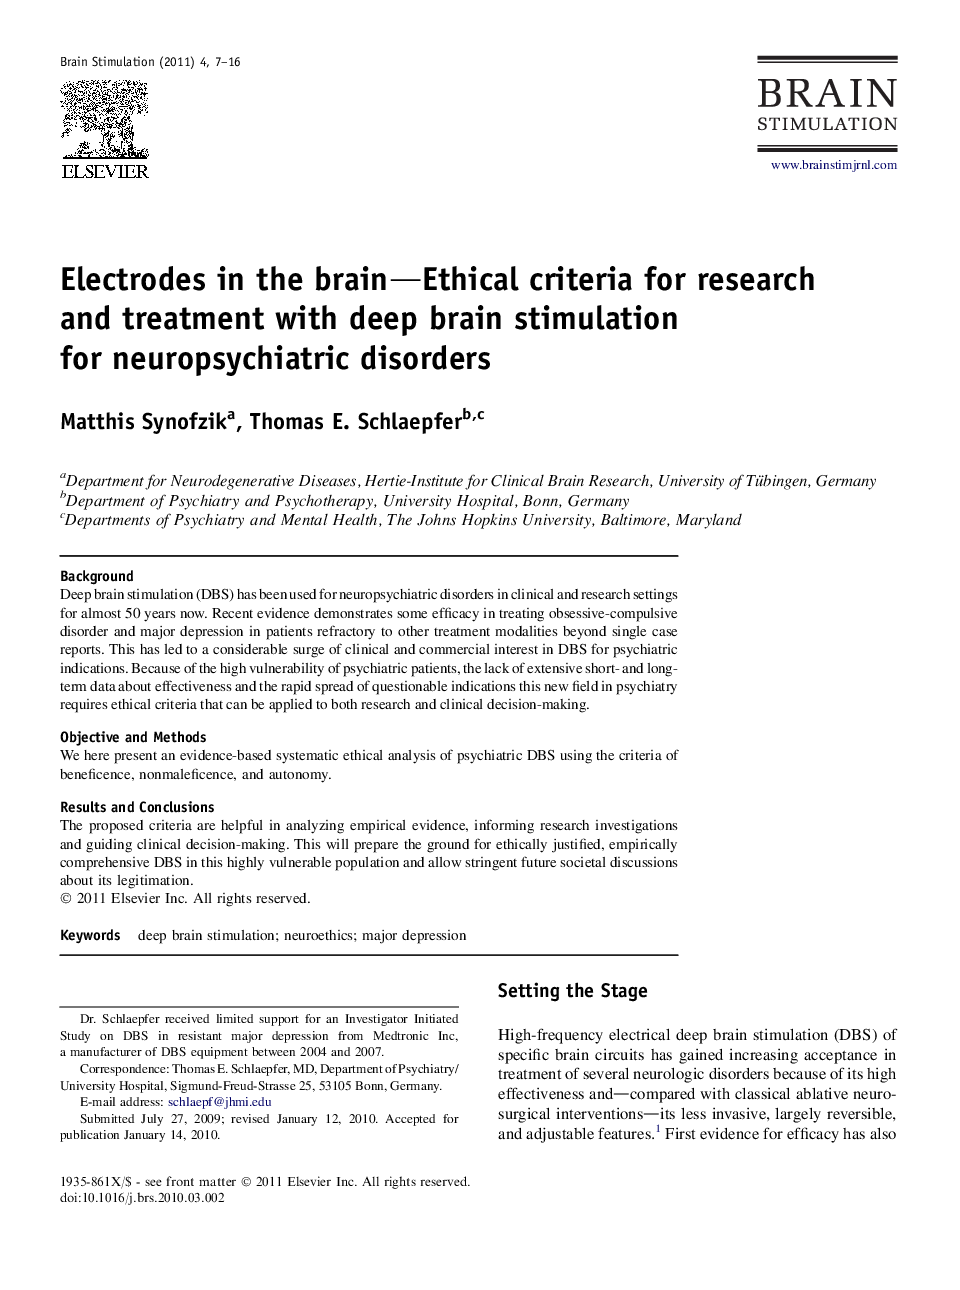 Electrodes in the brain—Ethical criteria for research and treatment with deep brain stimulation for neuropsychiatric disorders 